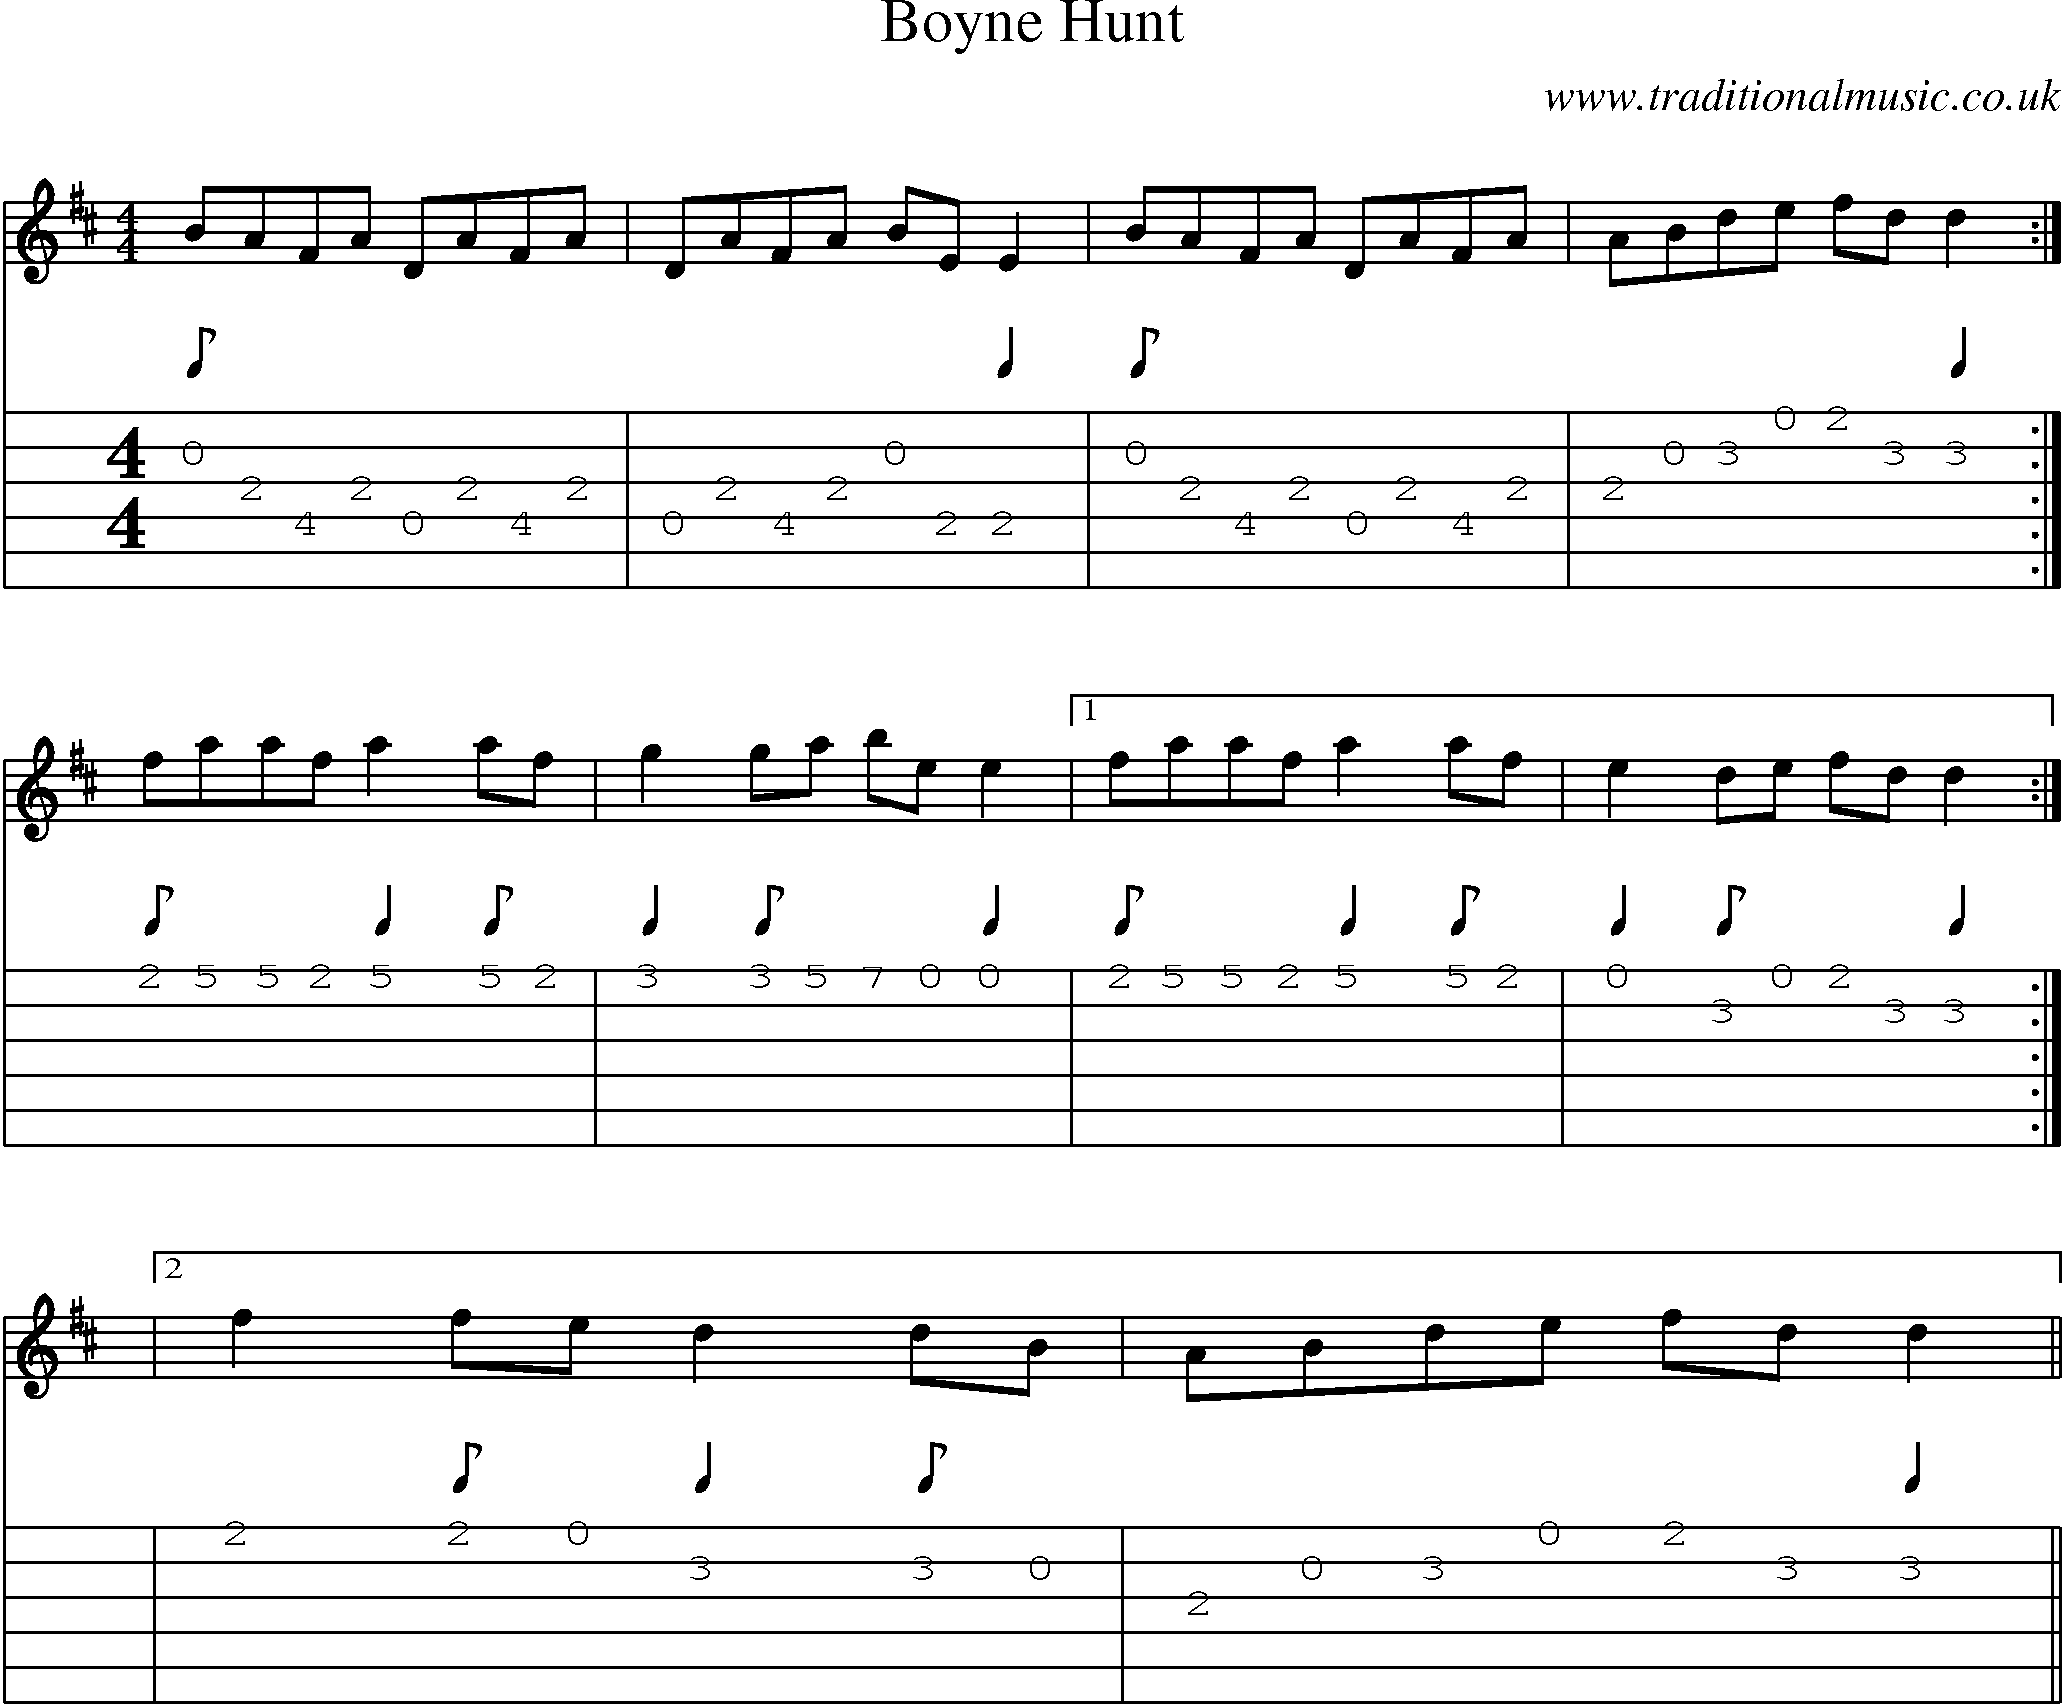 Music Score and Guitar Tabs for Boyne Hunt